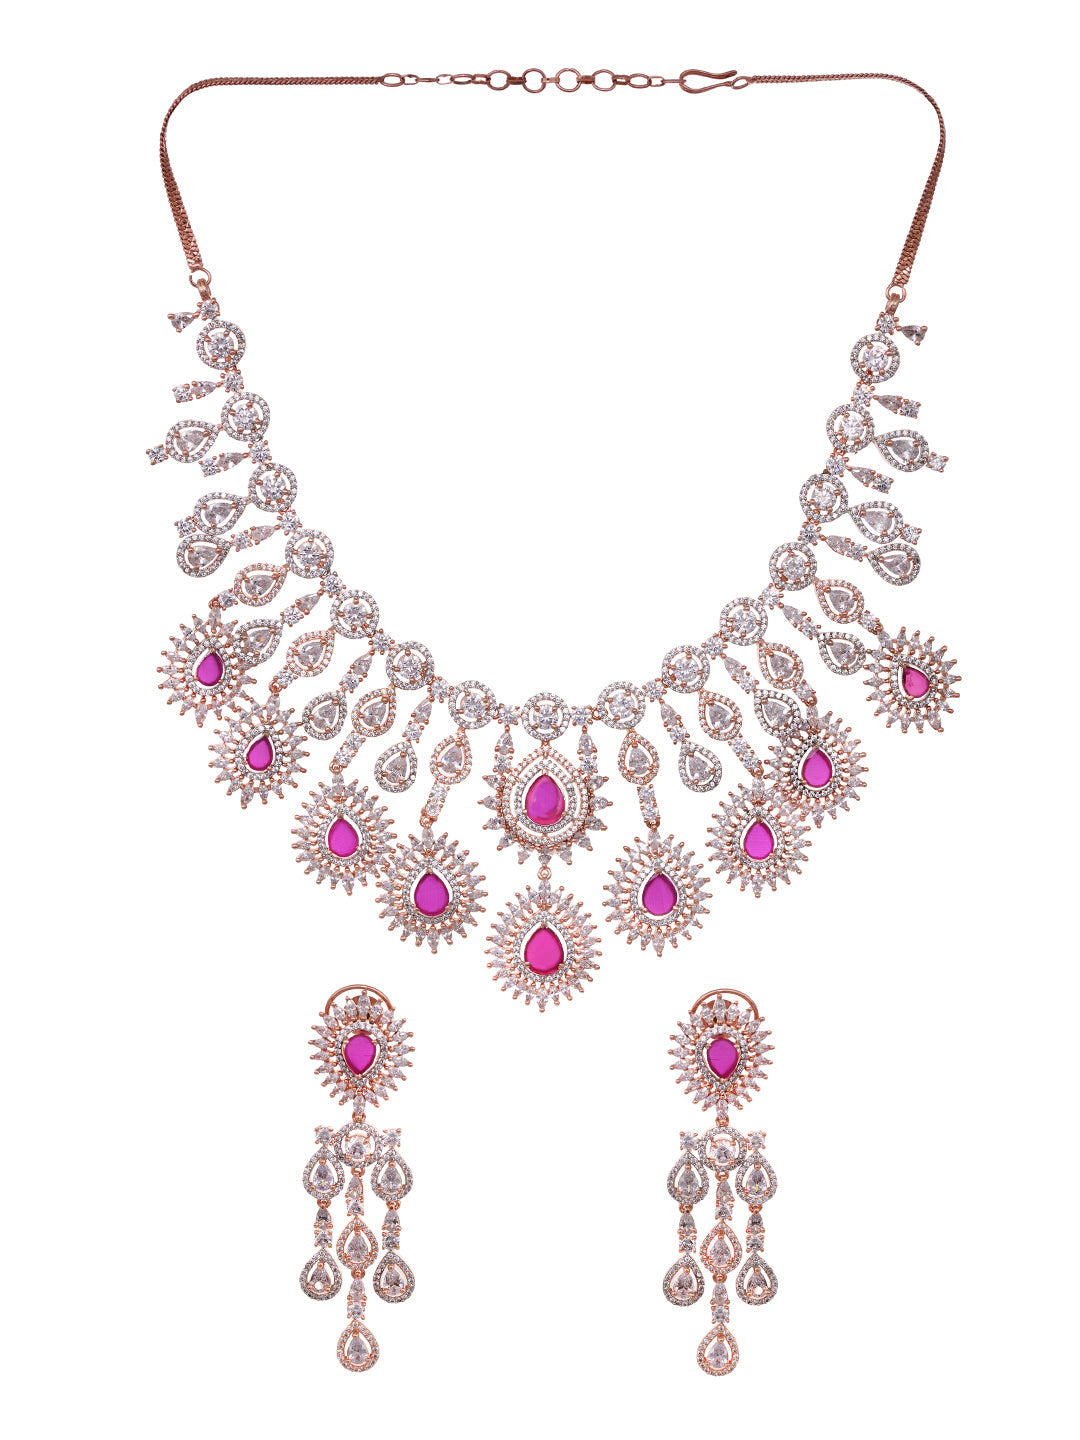 Julie Vos Marbella Statement Necklace in Ruby Red and Freshwater Pe… -  Jewelry